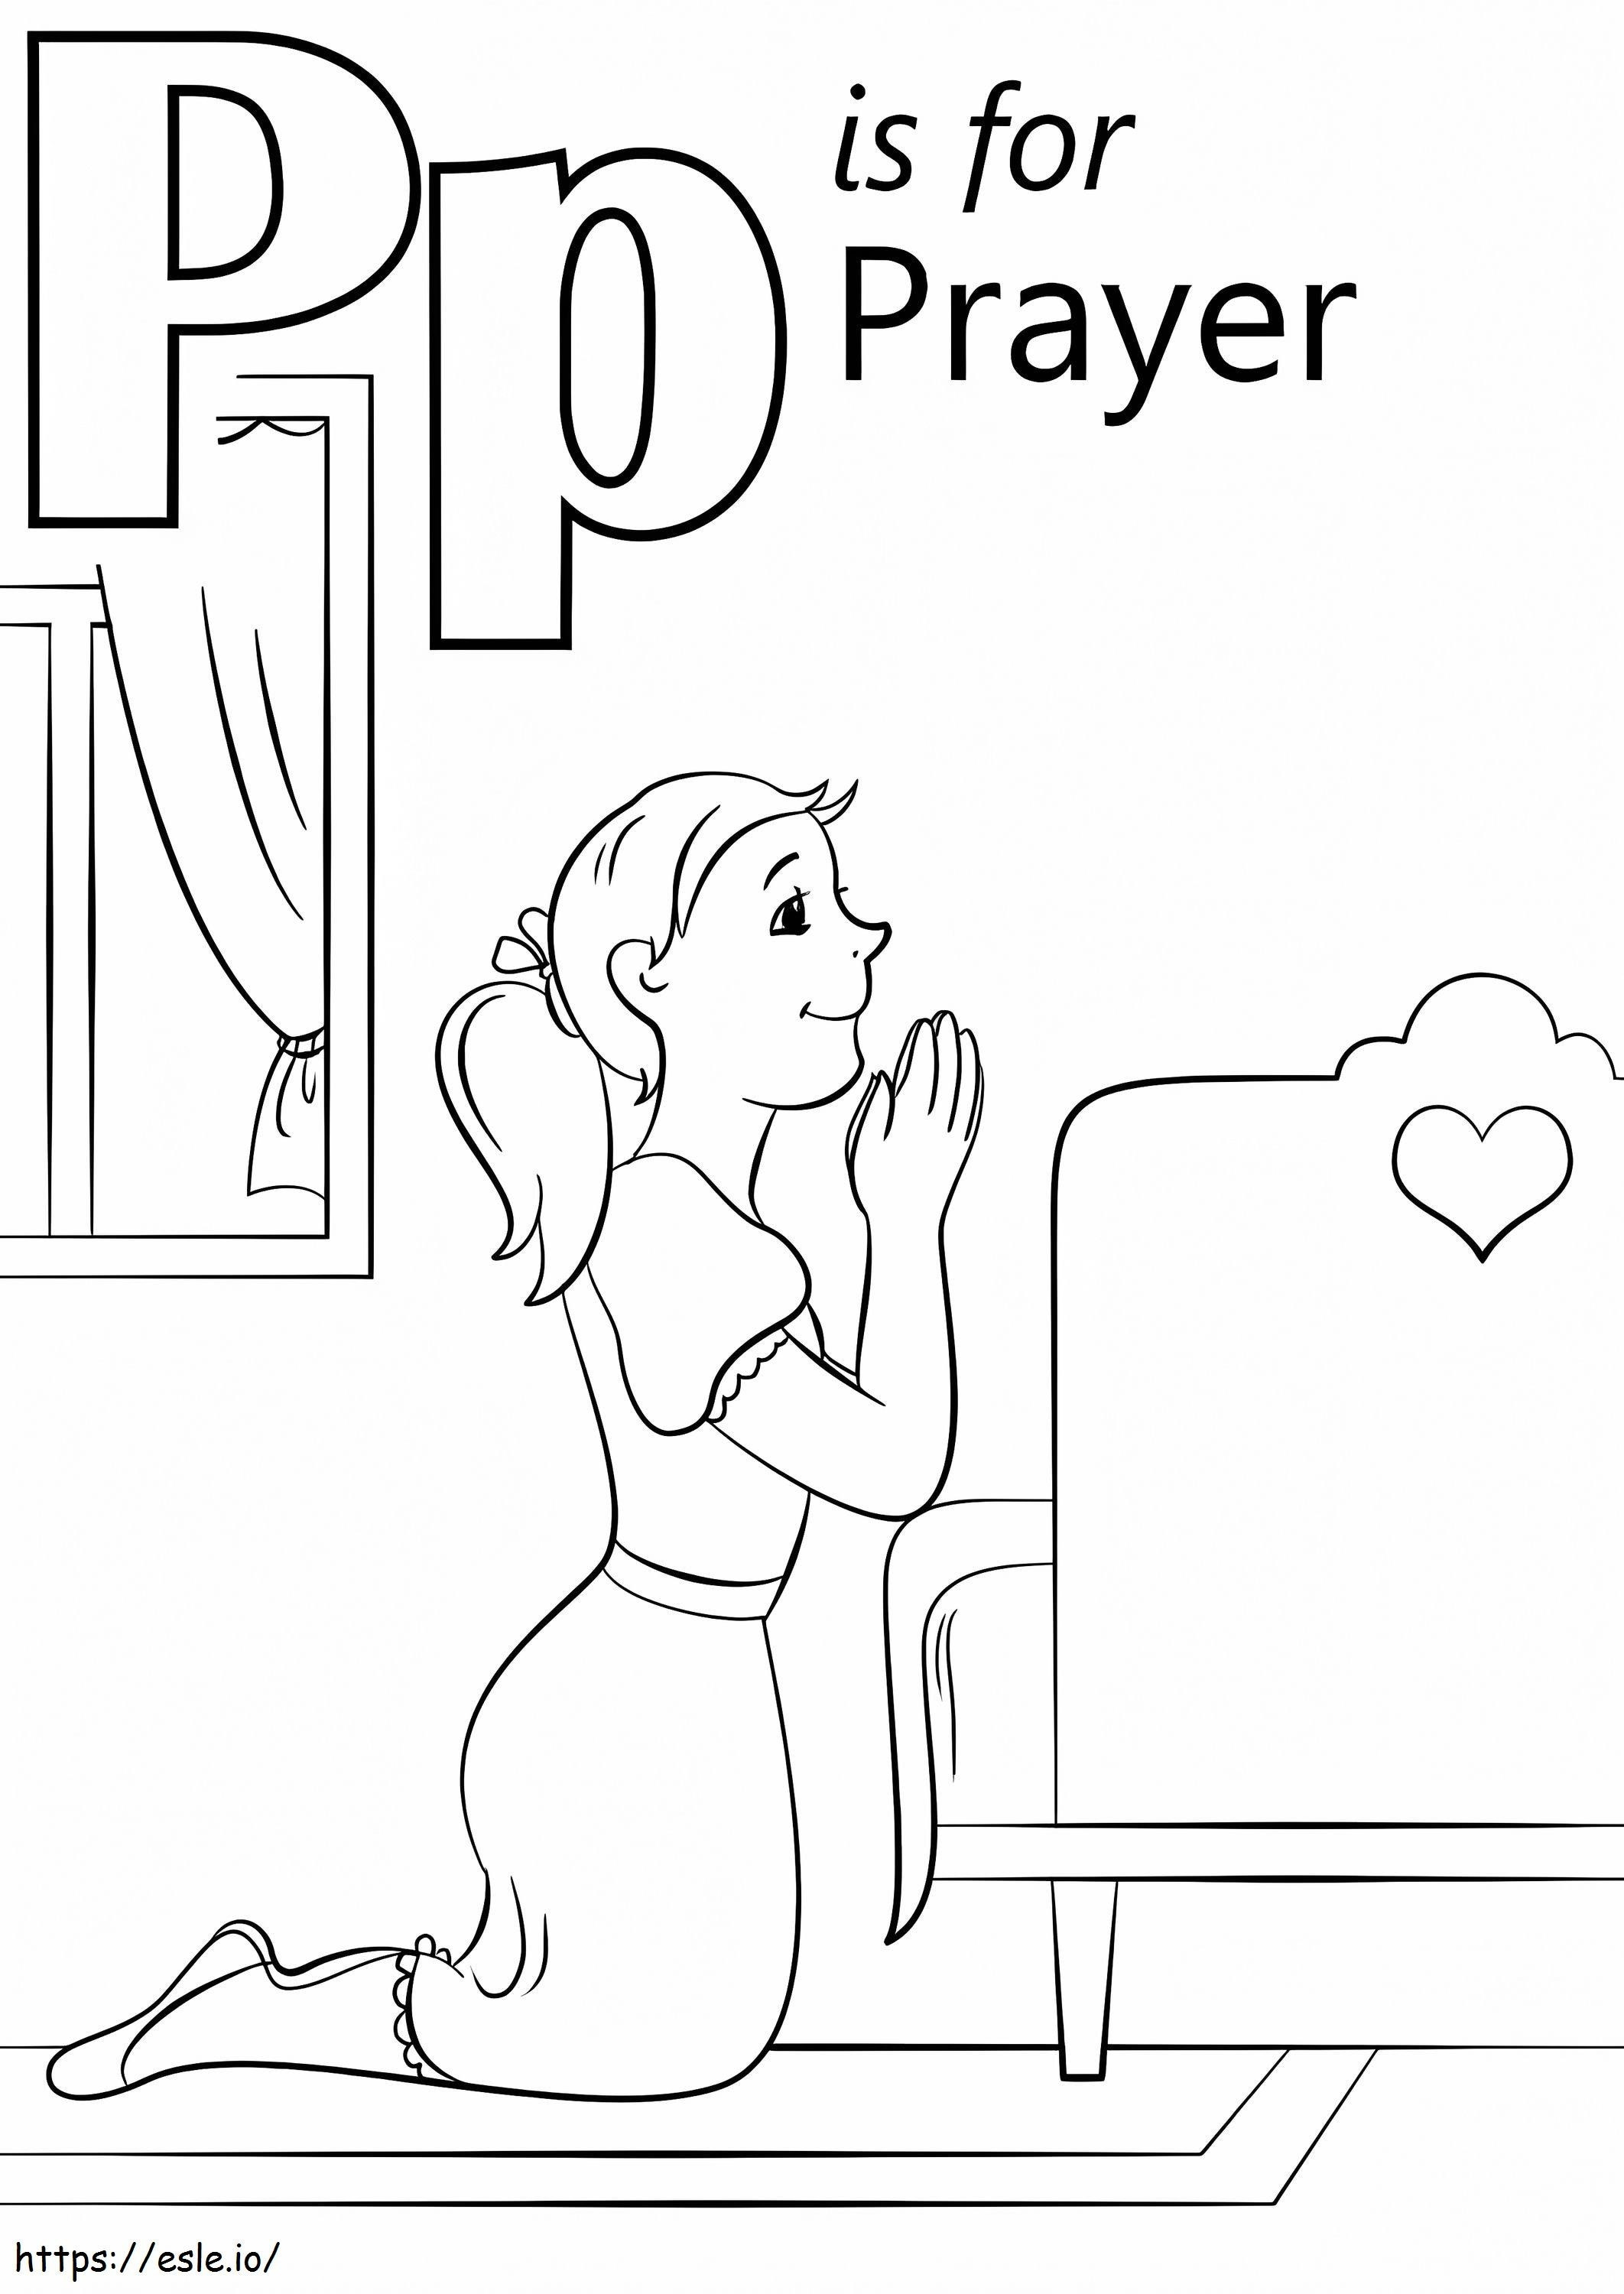 Prayer Letter P coloring page